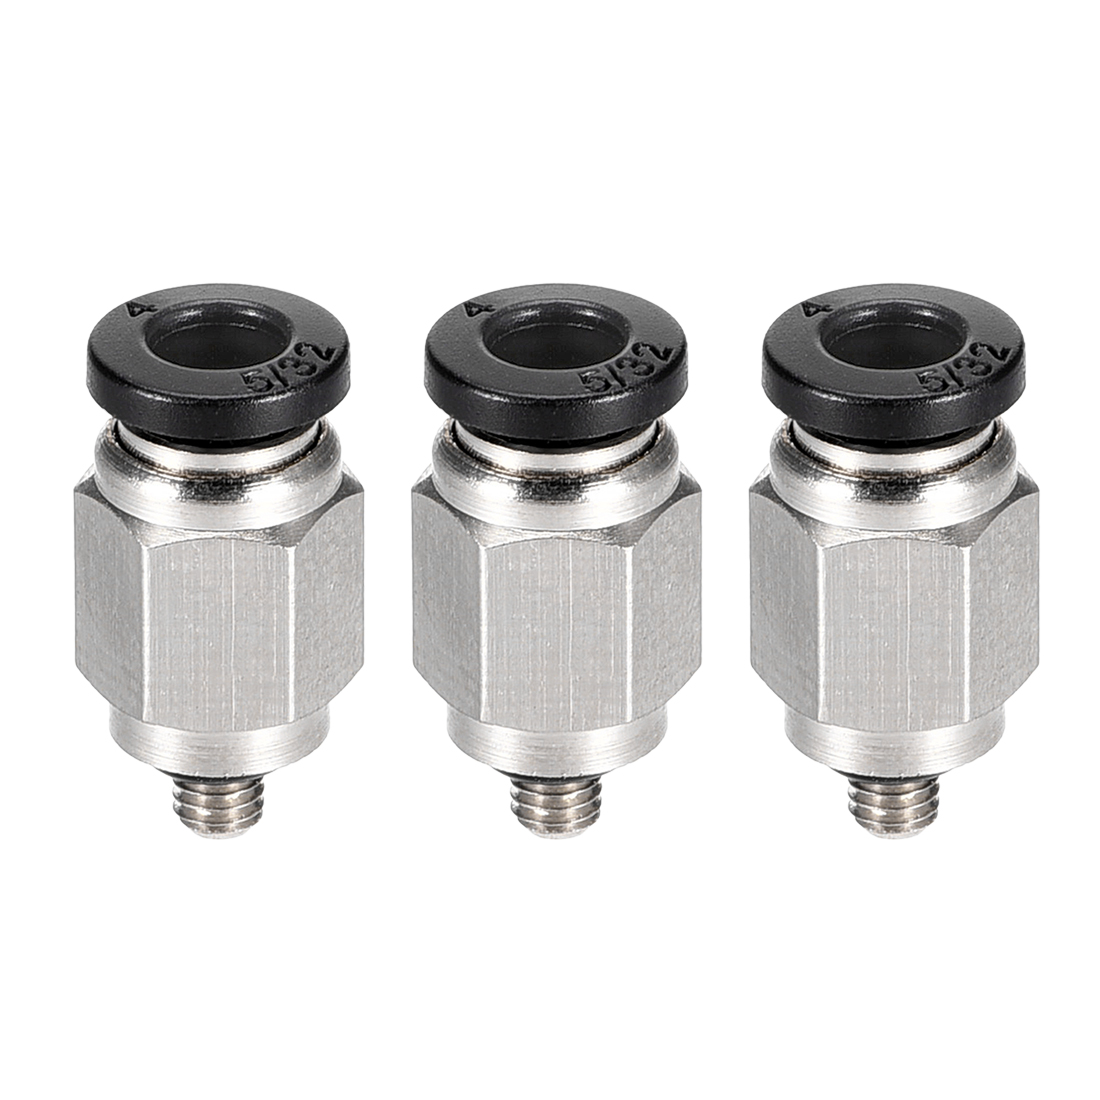 Unique Bargains Straight Pneumatic Push to Quick Connect Fittings M3 x 4mm OD Silver Tone 3pcs